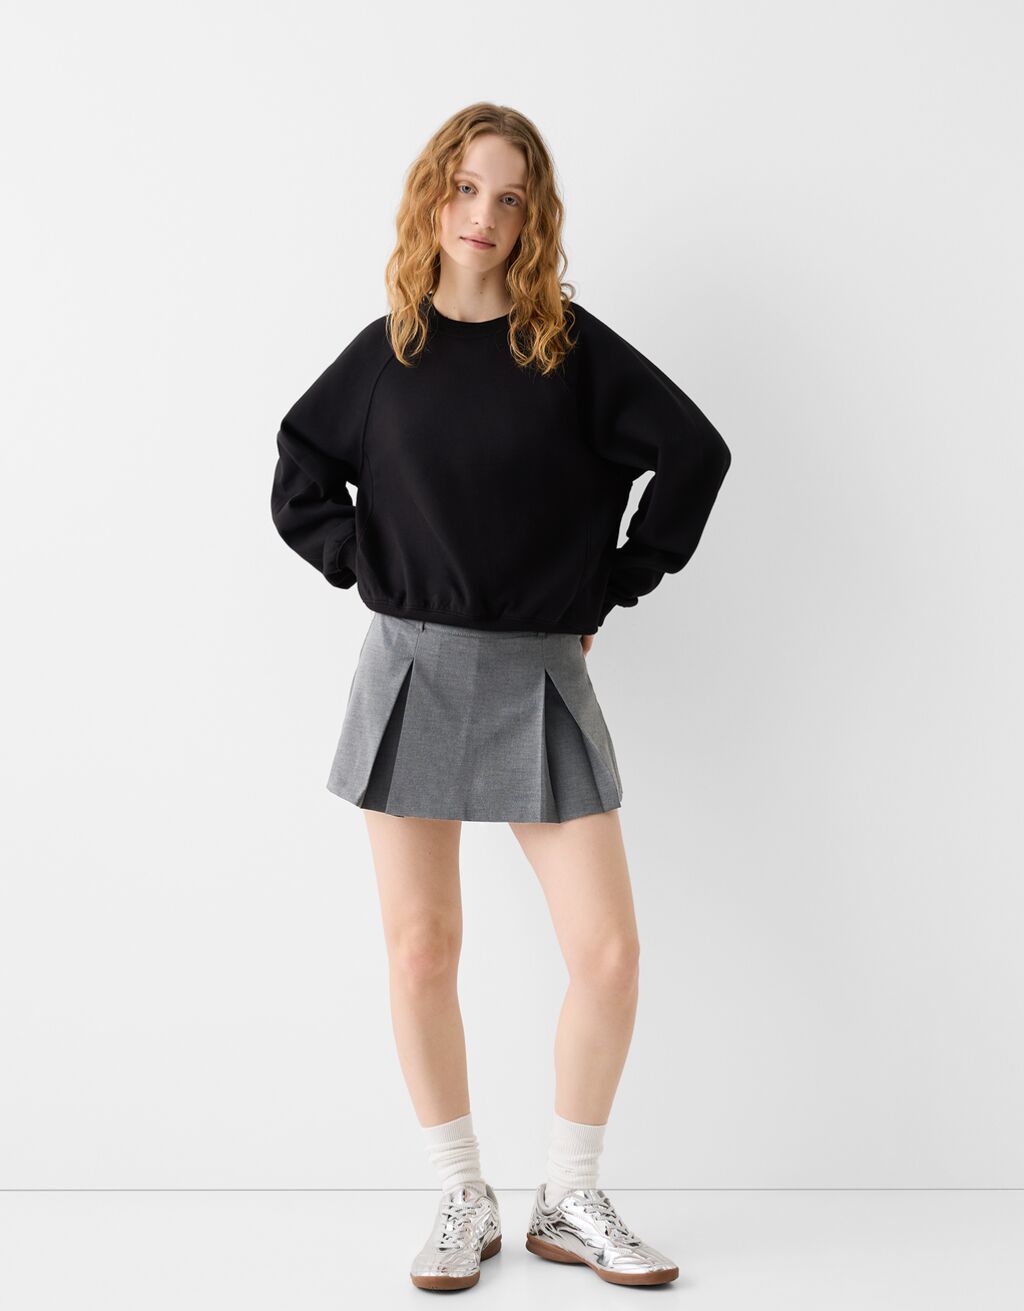 Tailored skort with box pleats - Skirts and Shorts - BSK Teen